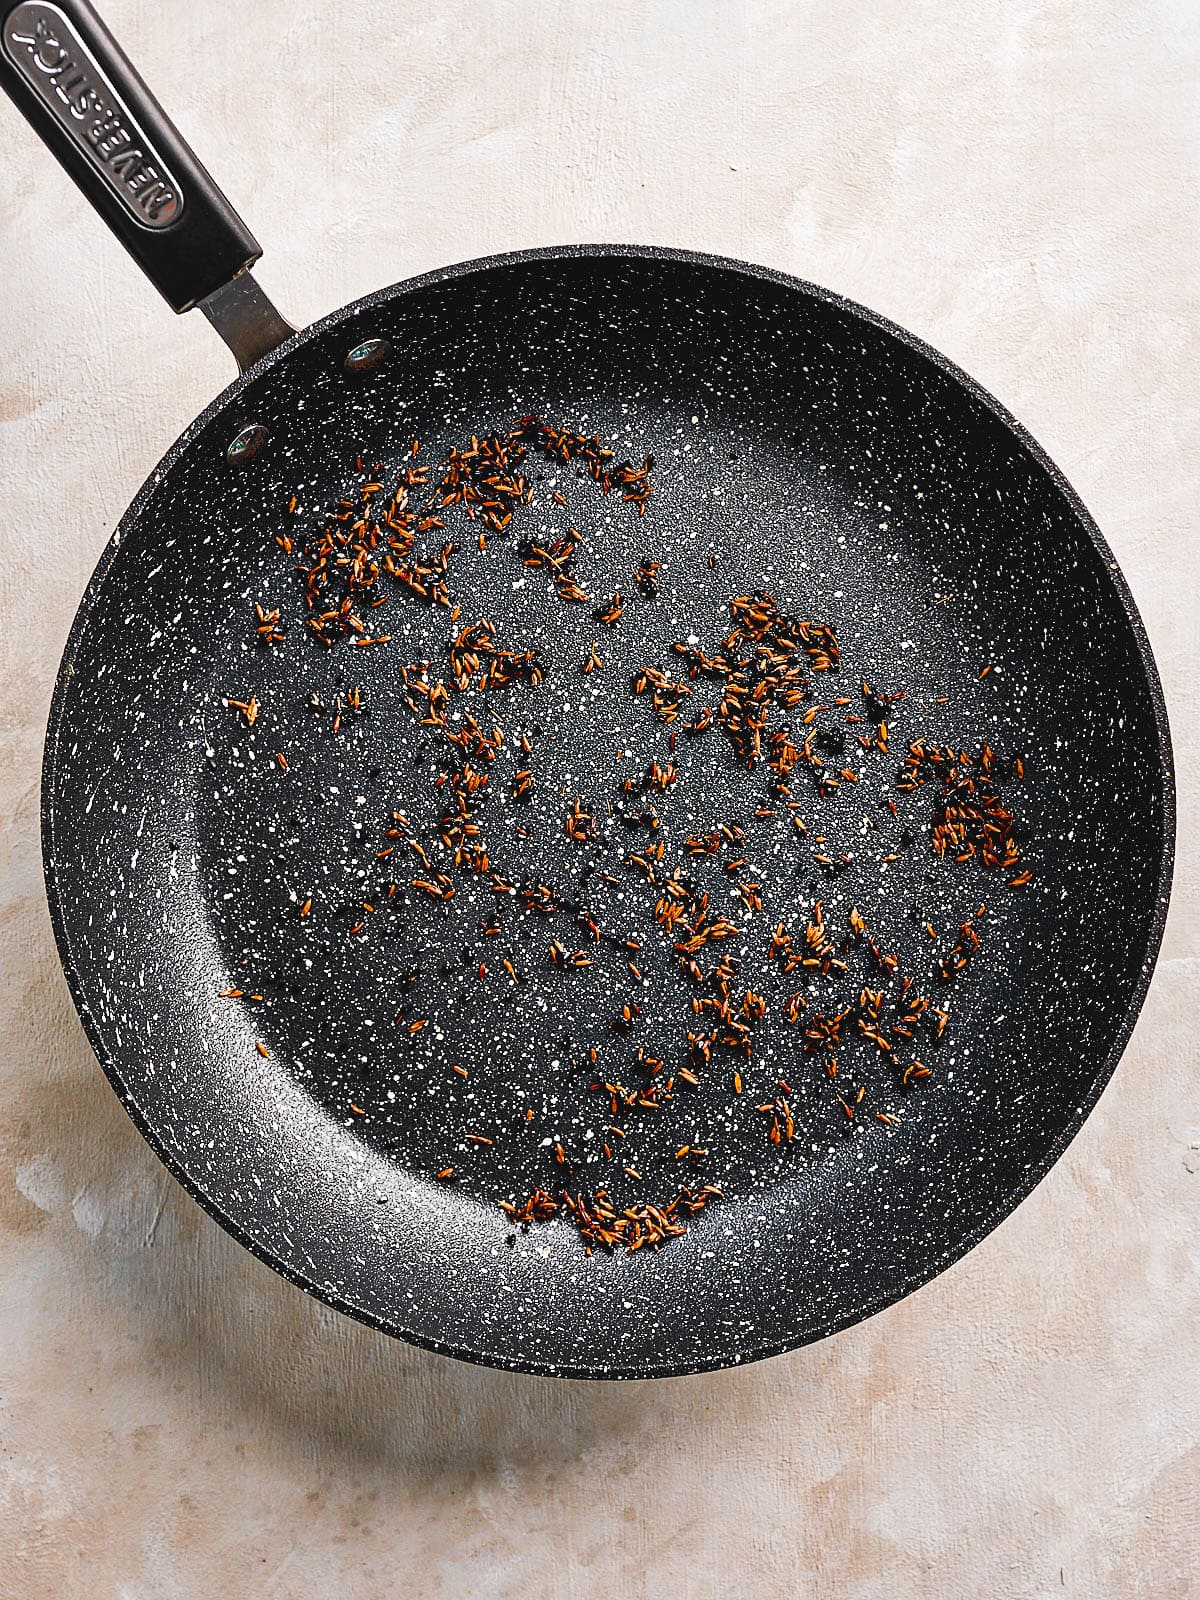 Frying off whole spices in a frying pan